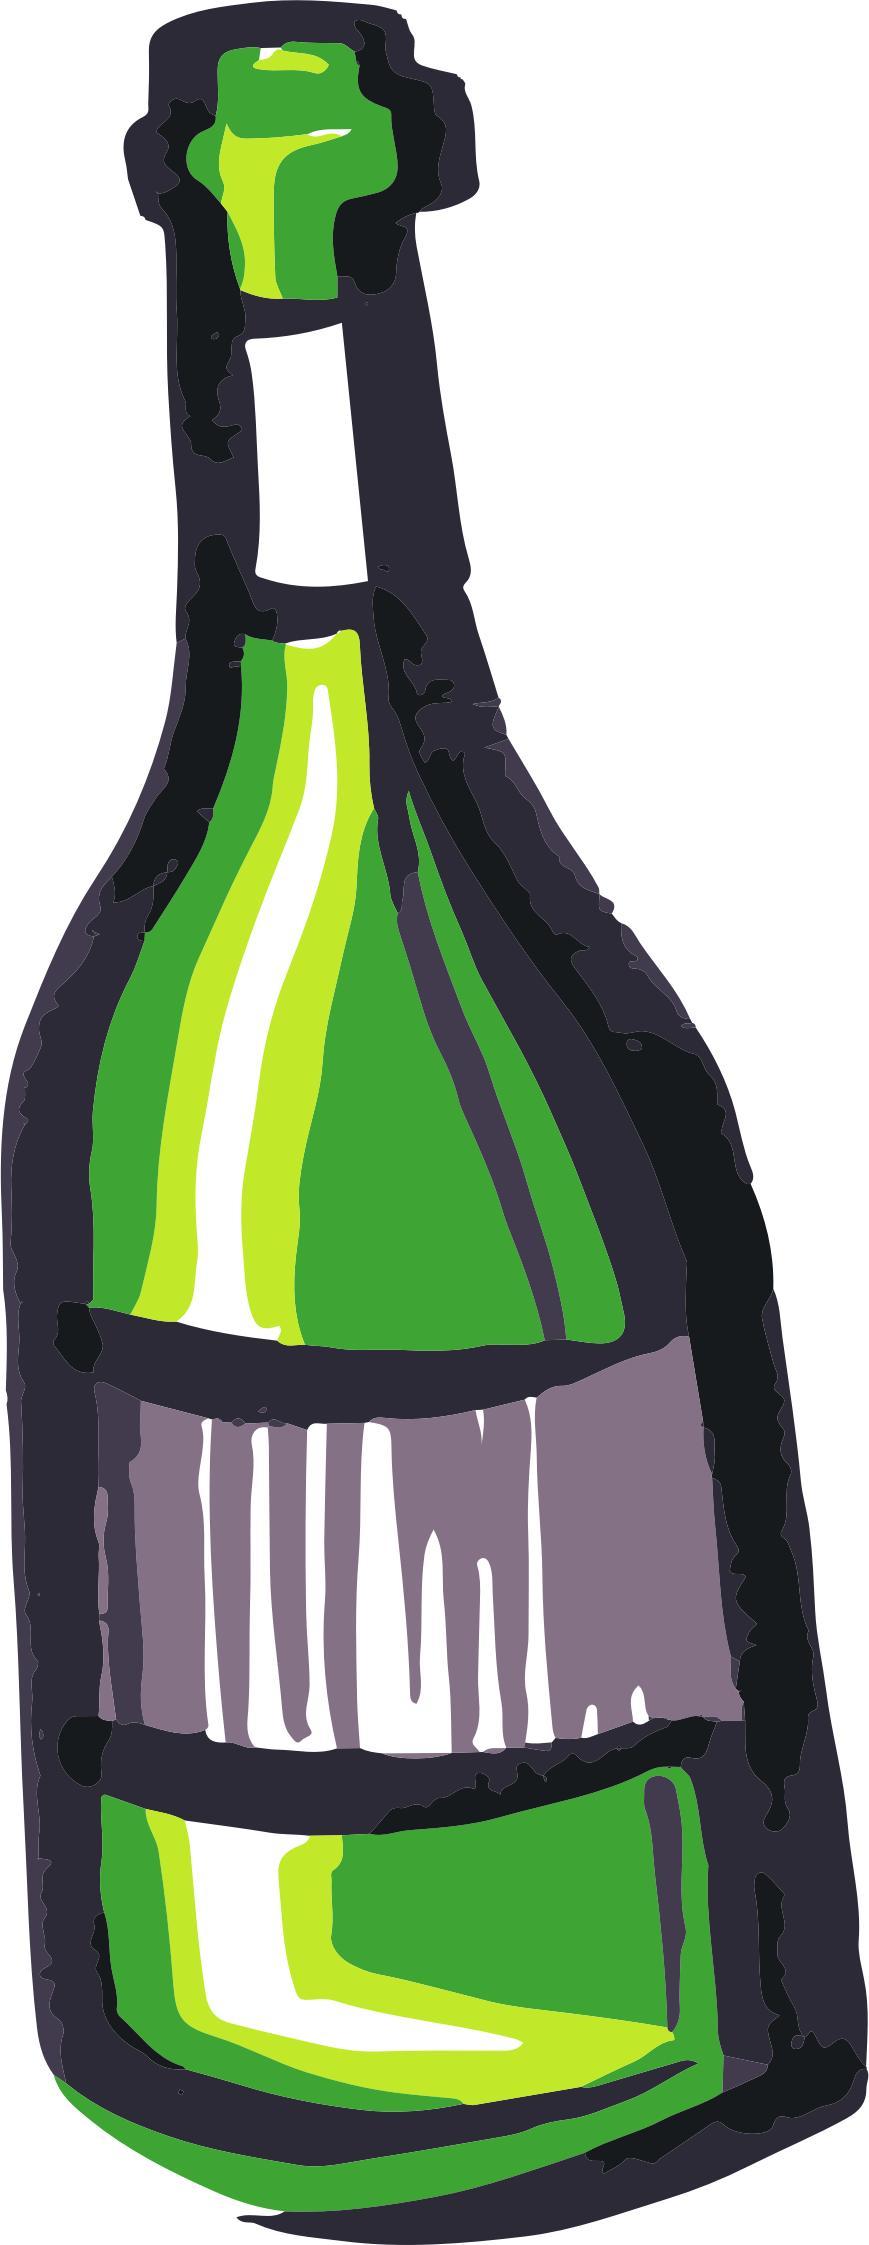 Raseone Wine Bottle png transparent